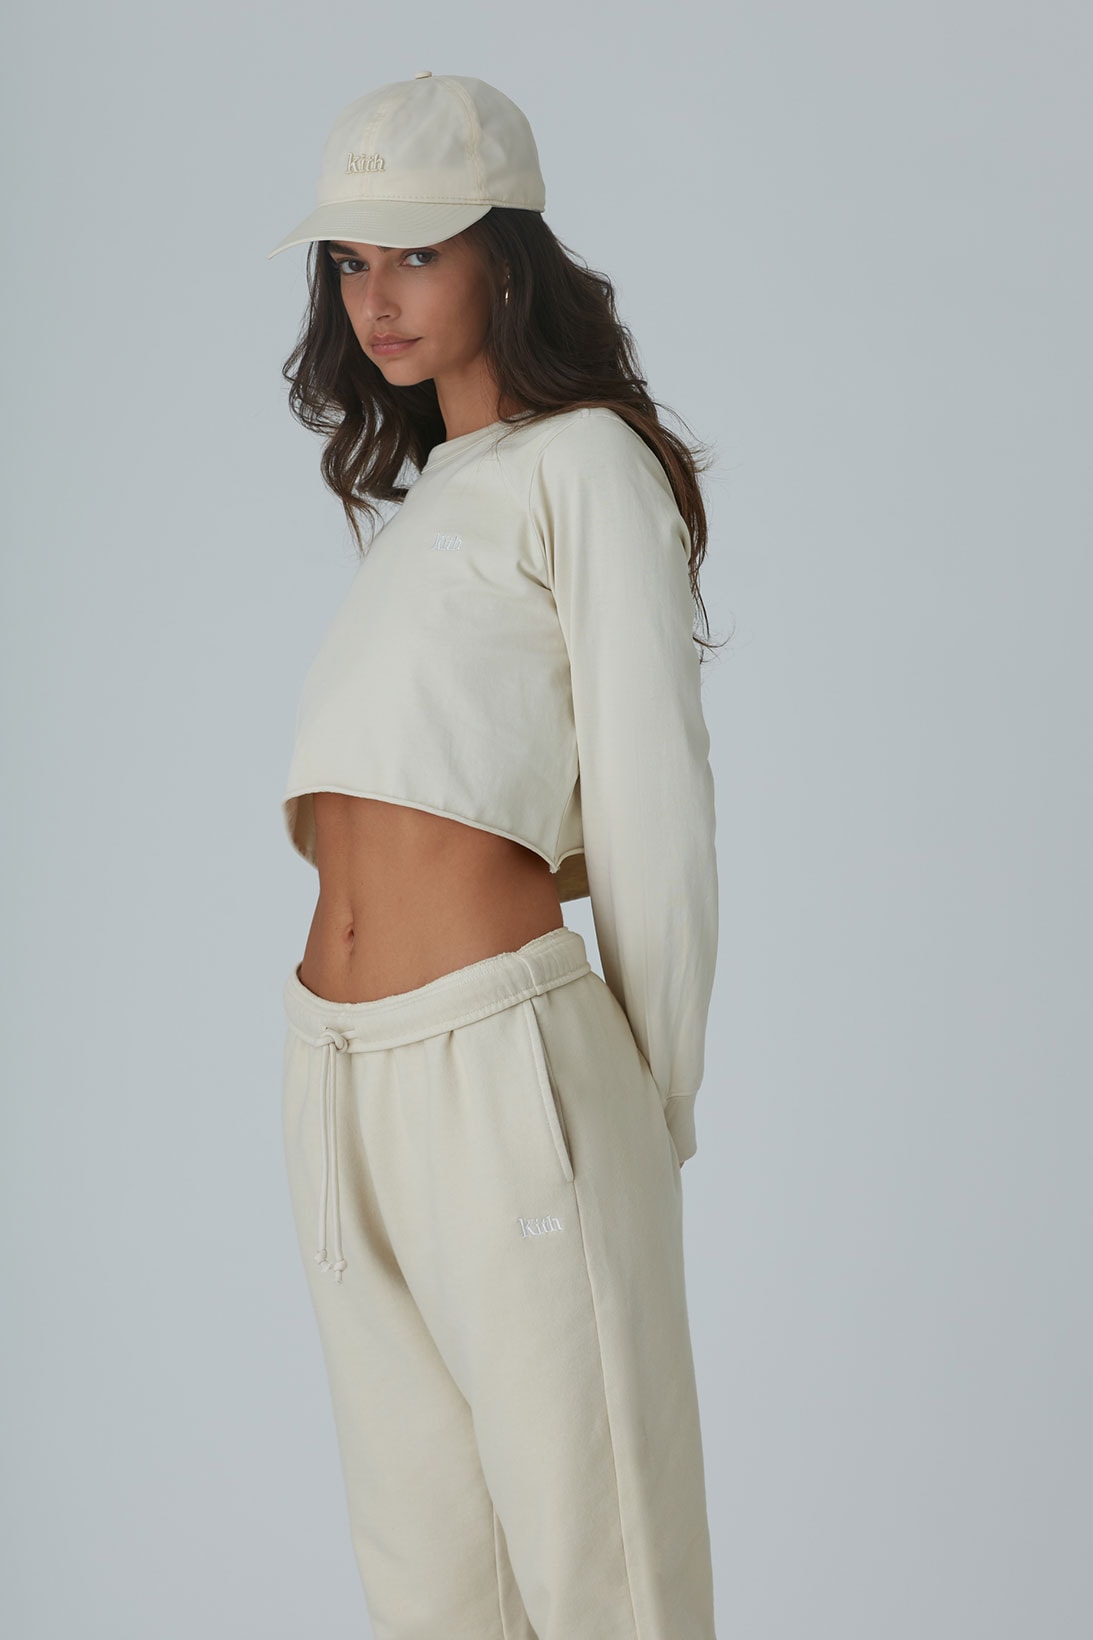 kith women spring 2021 collection hat cropped tee pants